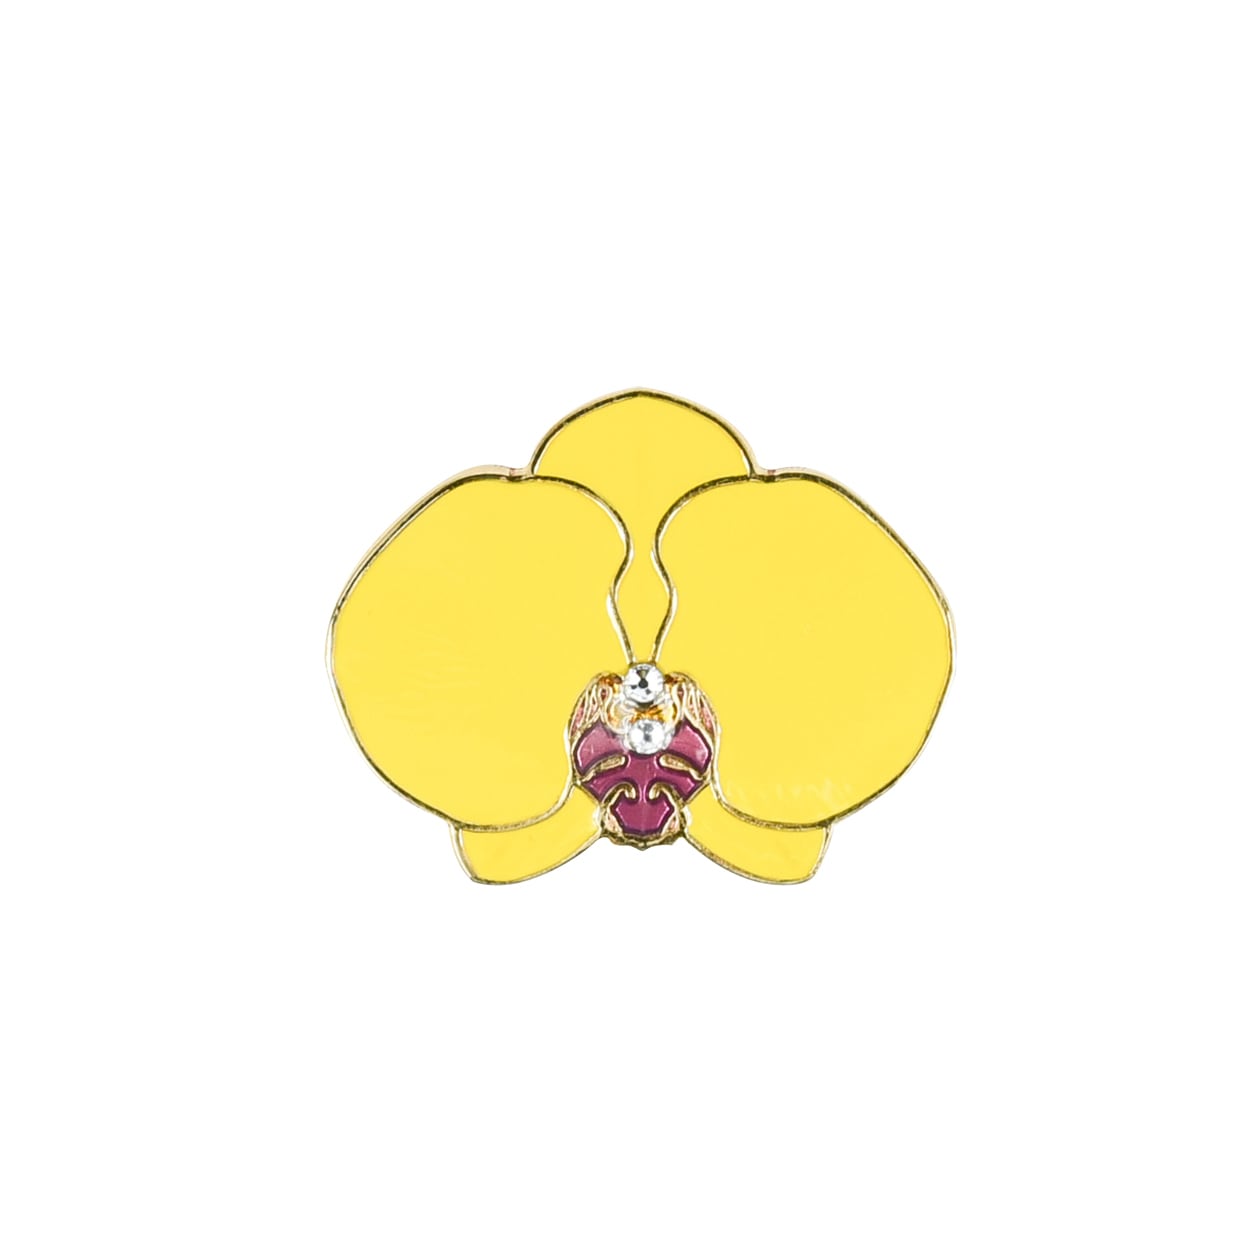 4. Orchid Yellow